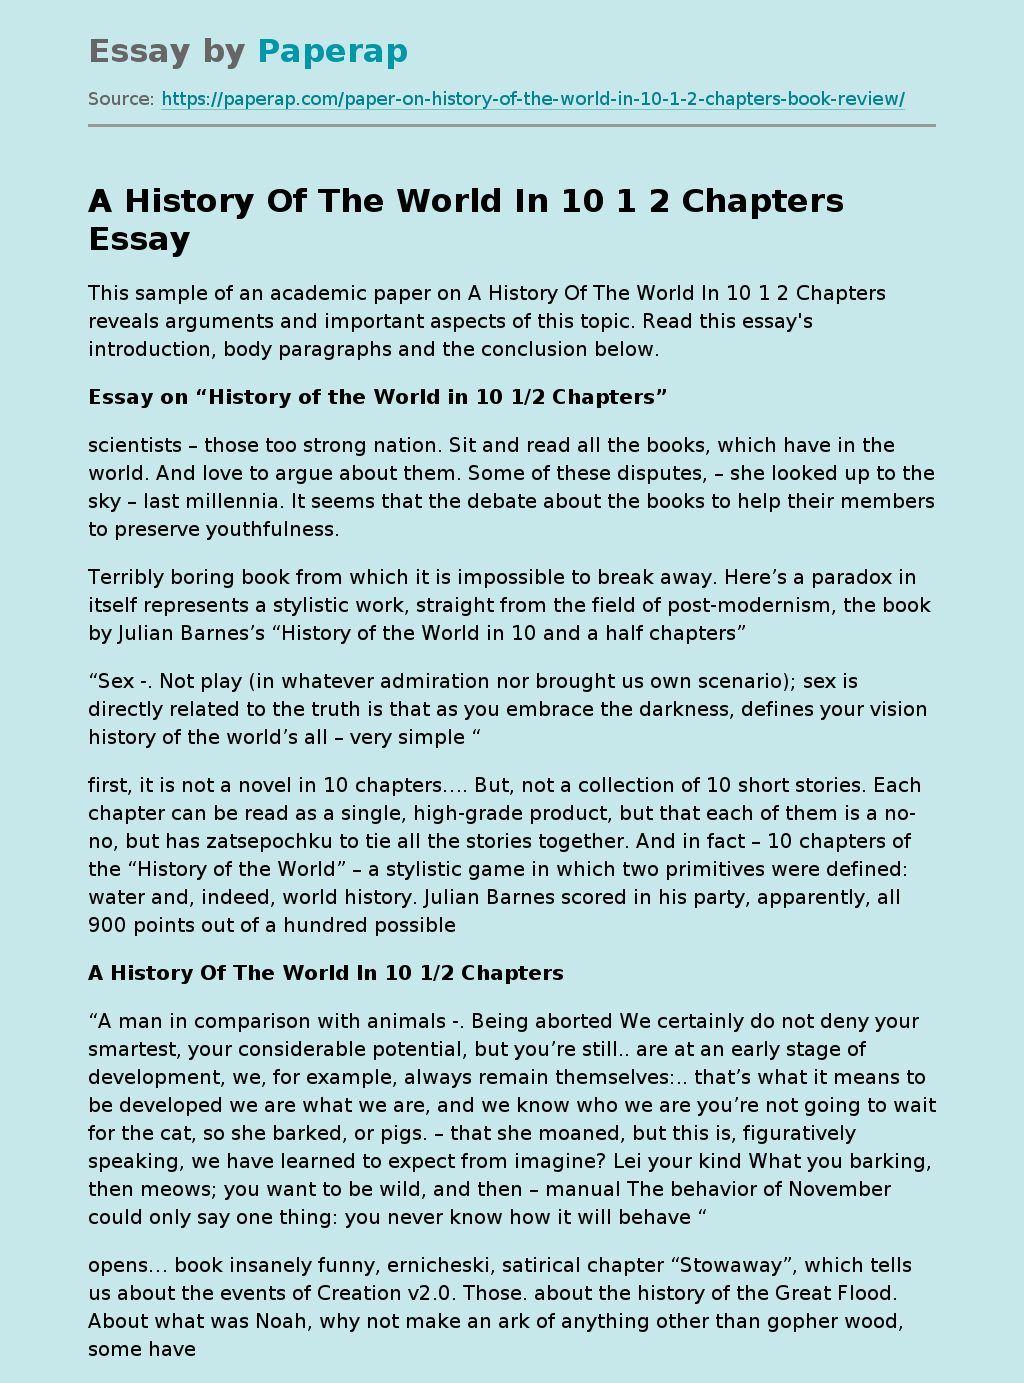 A History Of The World In 10 1 2 Chapters